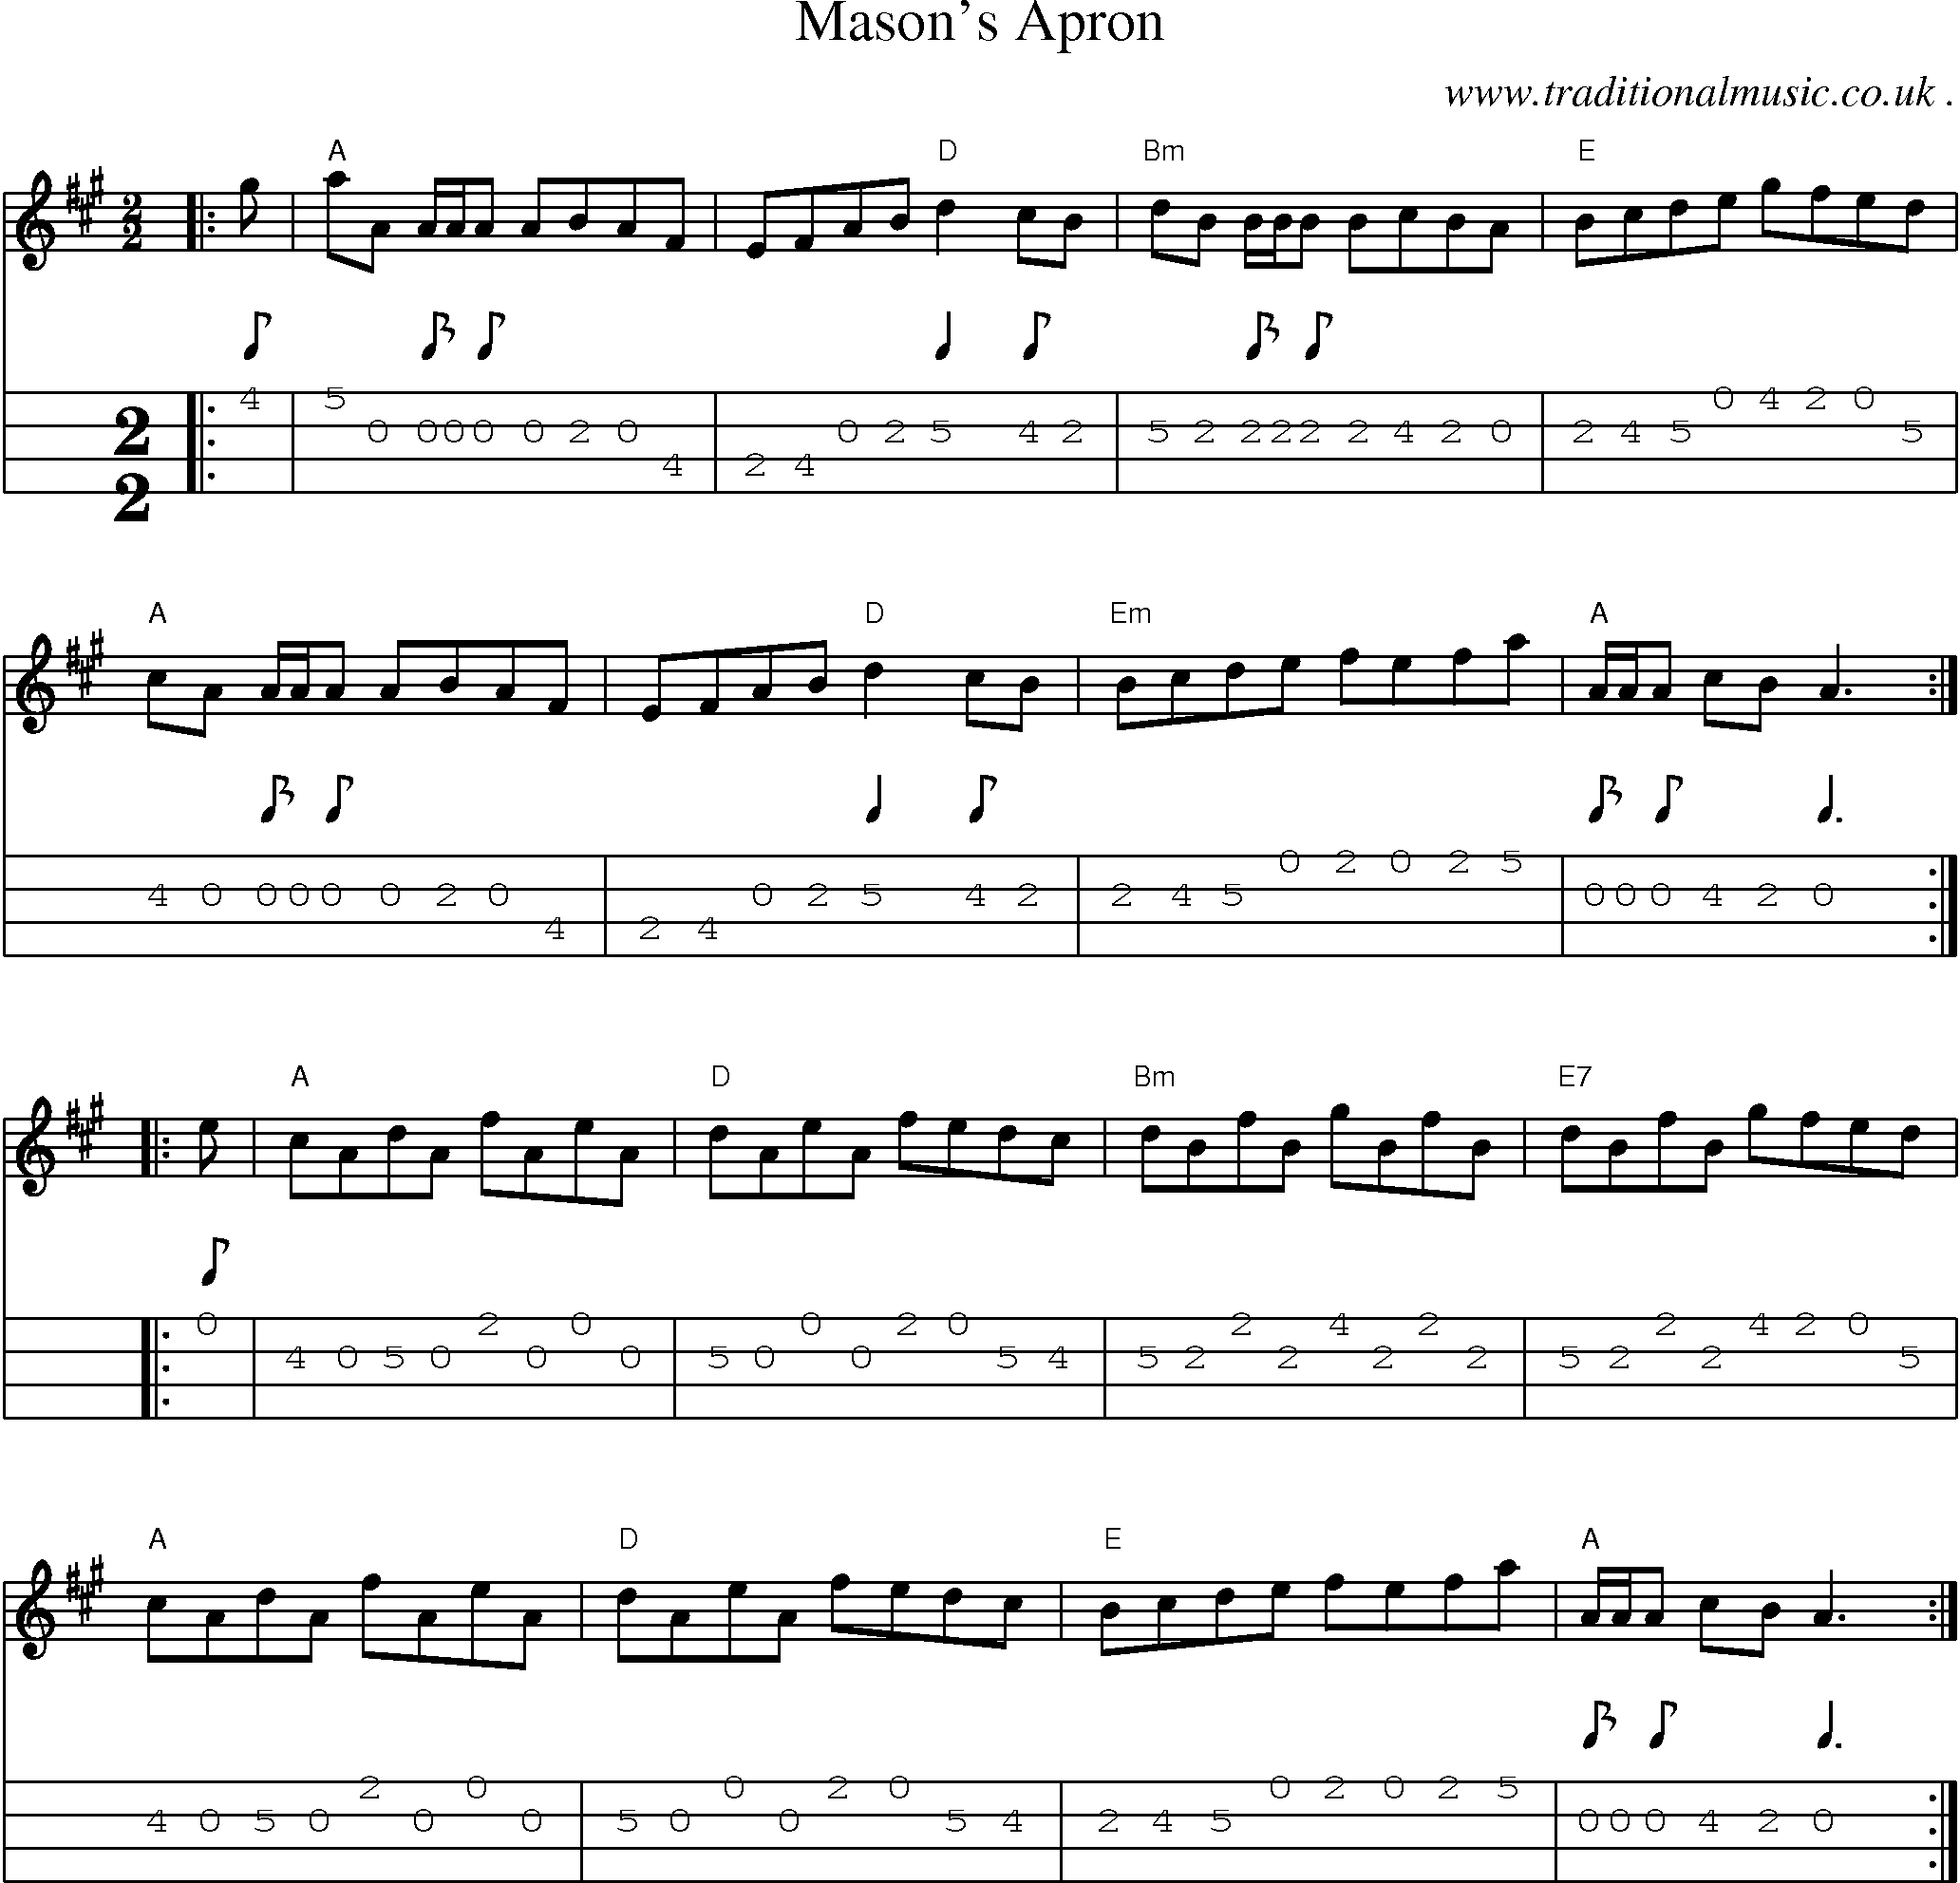 Music Score and Guitar Tabs for Masons Apron